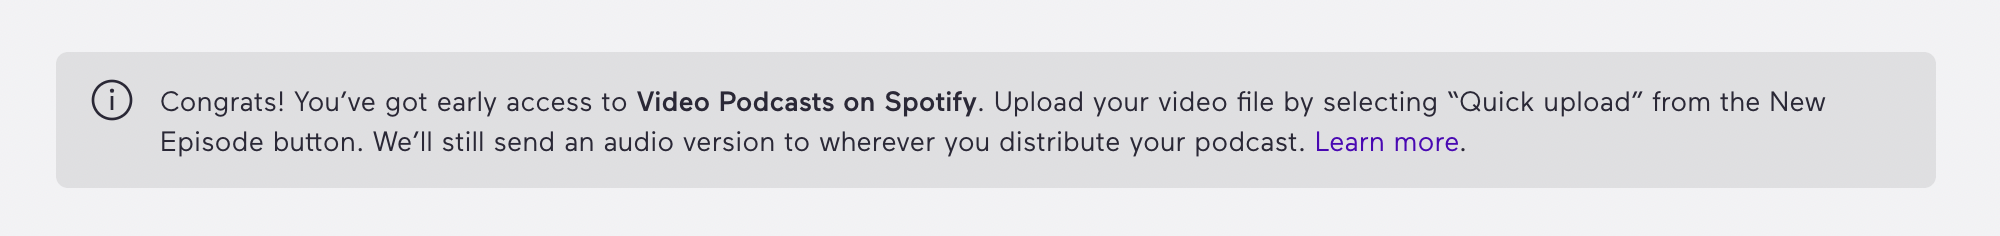 Spotify Video early access notification